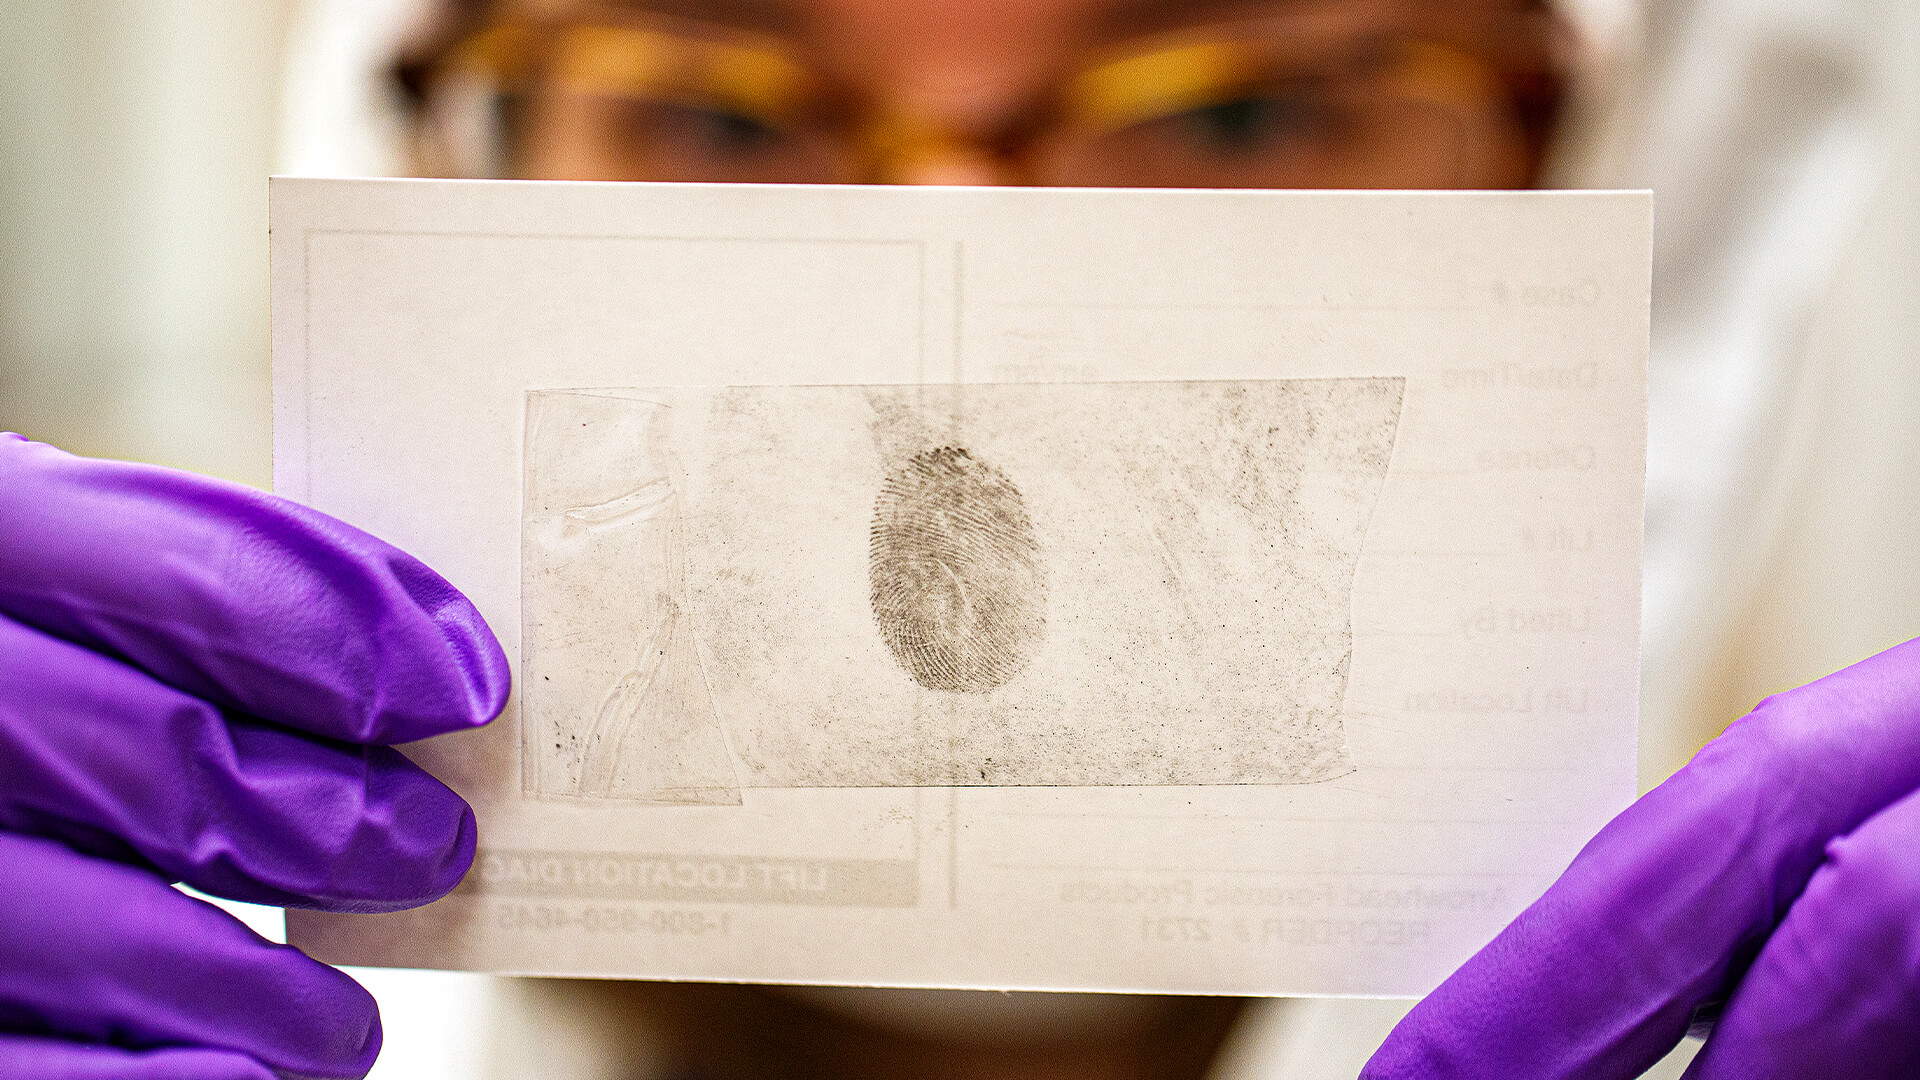 Student researcher examining a lifted fingerprint